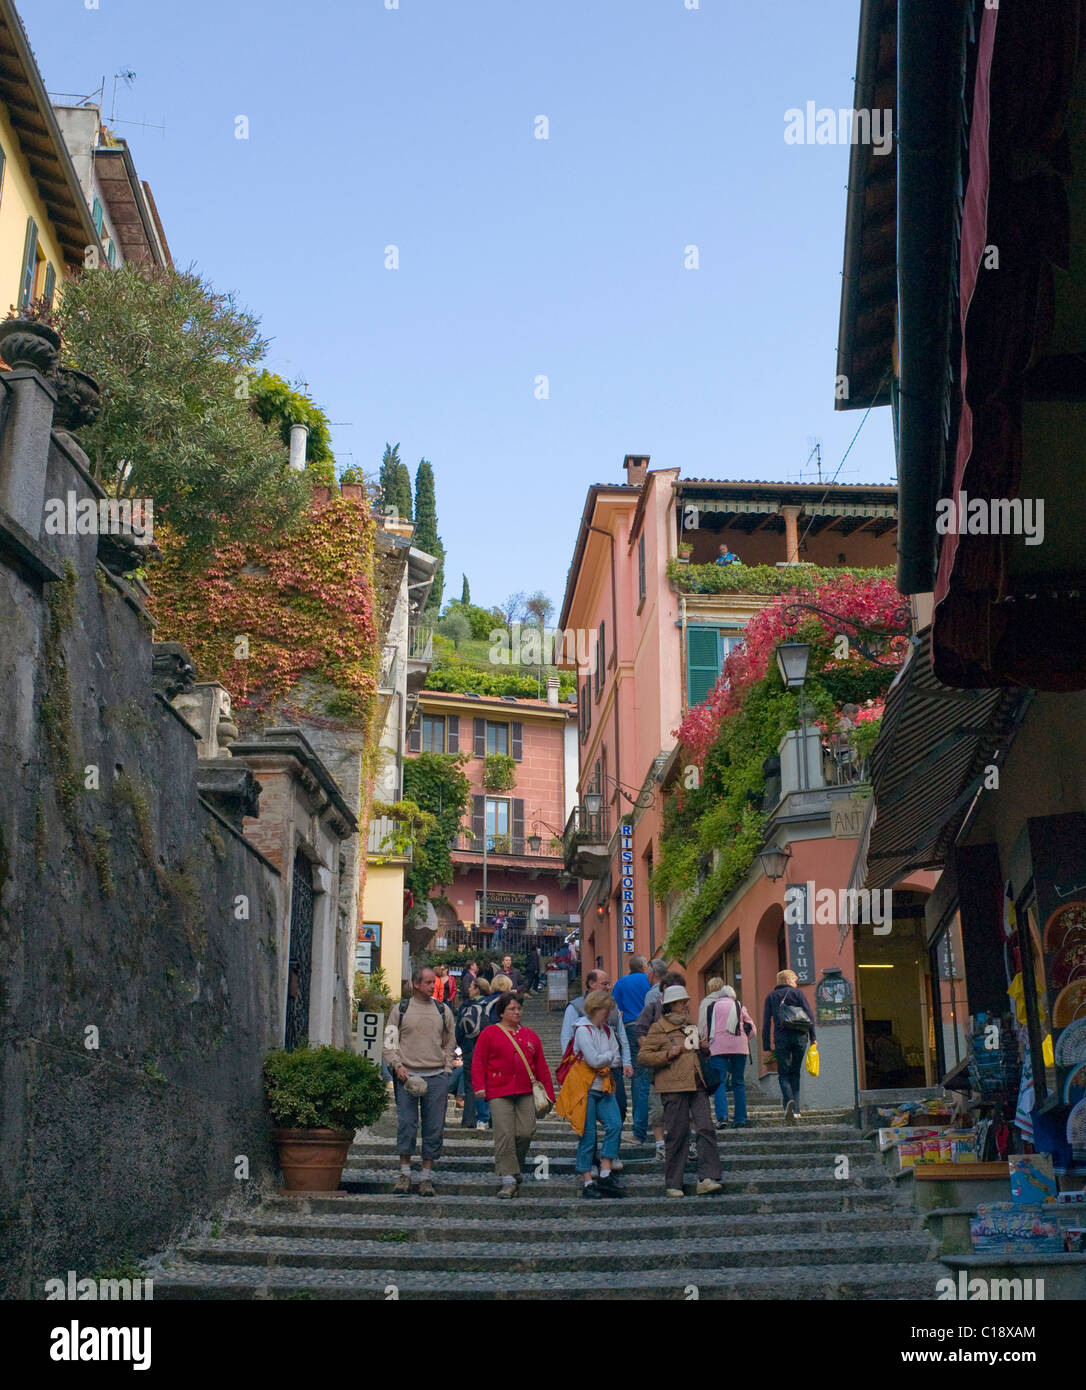 Tourists shopping in Bellagio, Italy, Europe Stock Photo